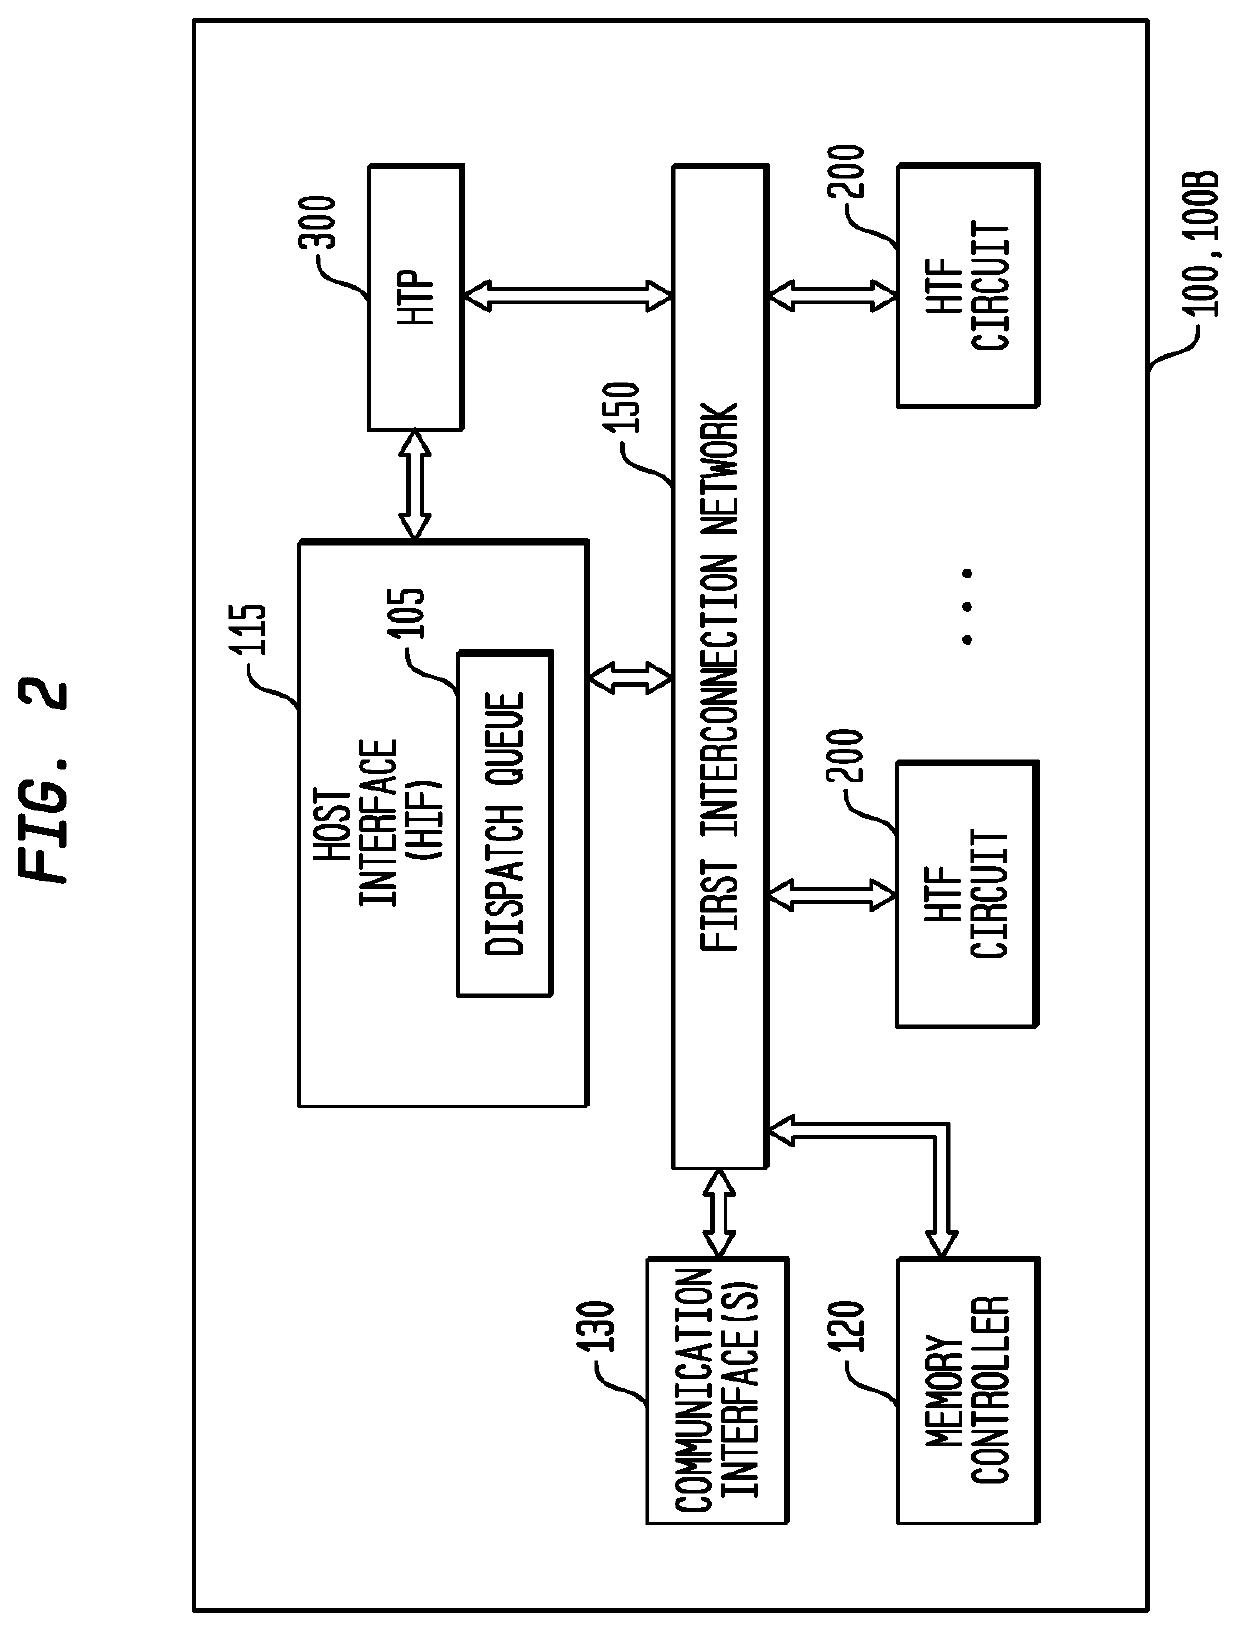 Memory Request Size Management in a Multi-Threaded, Self-Scheduling Processor